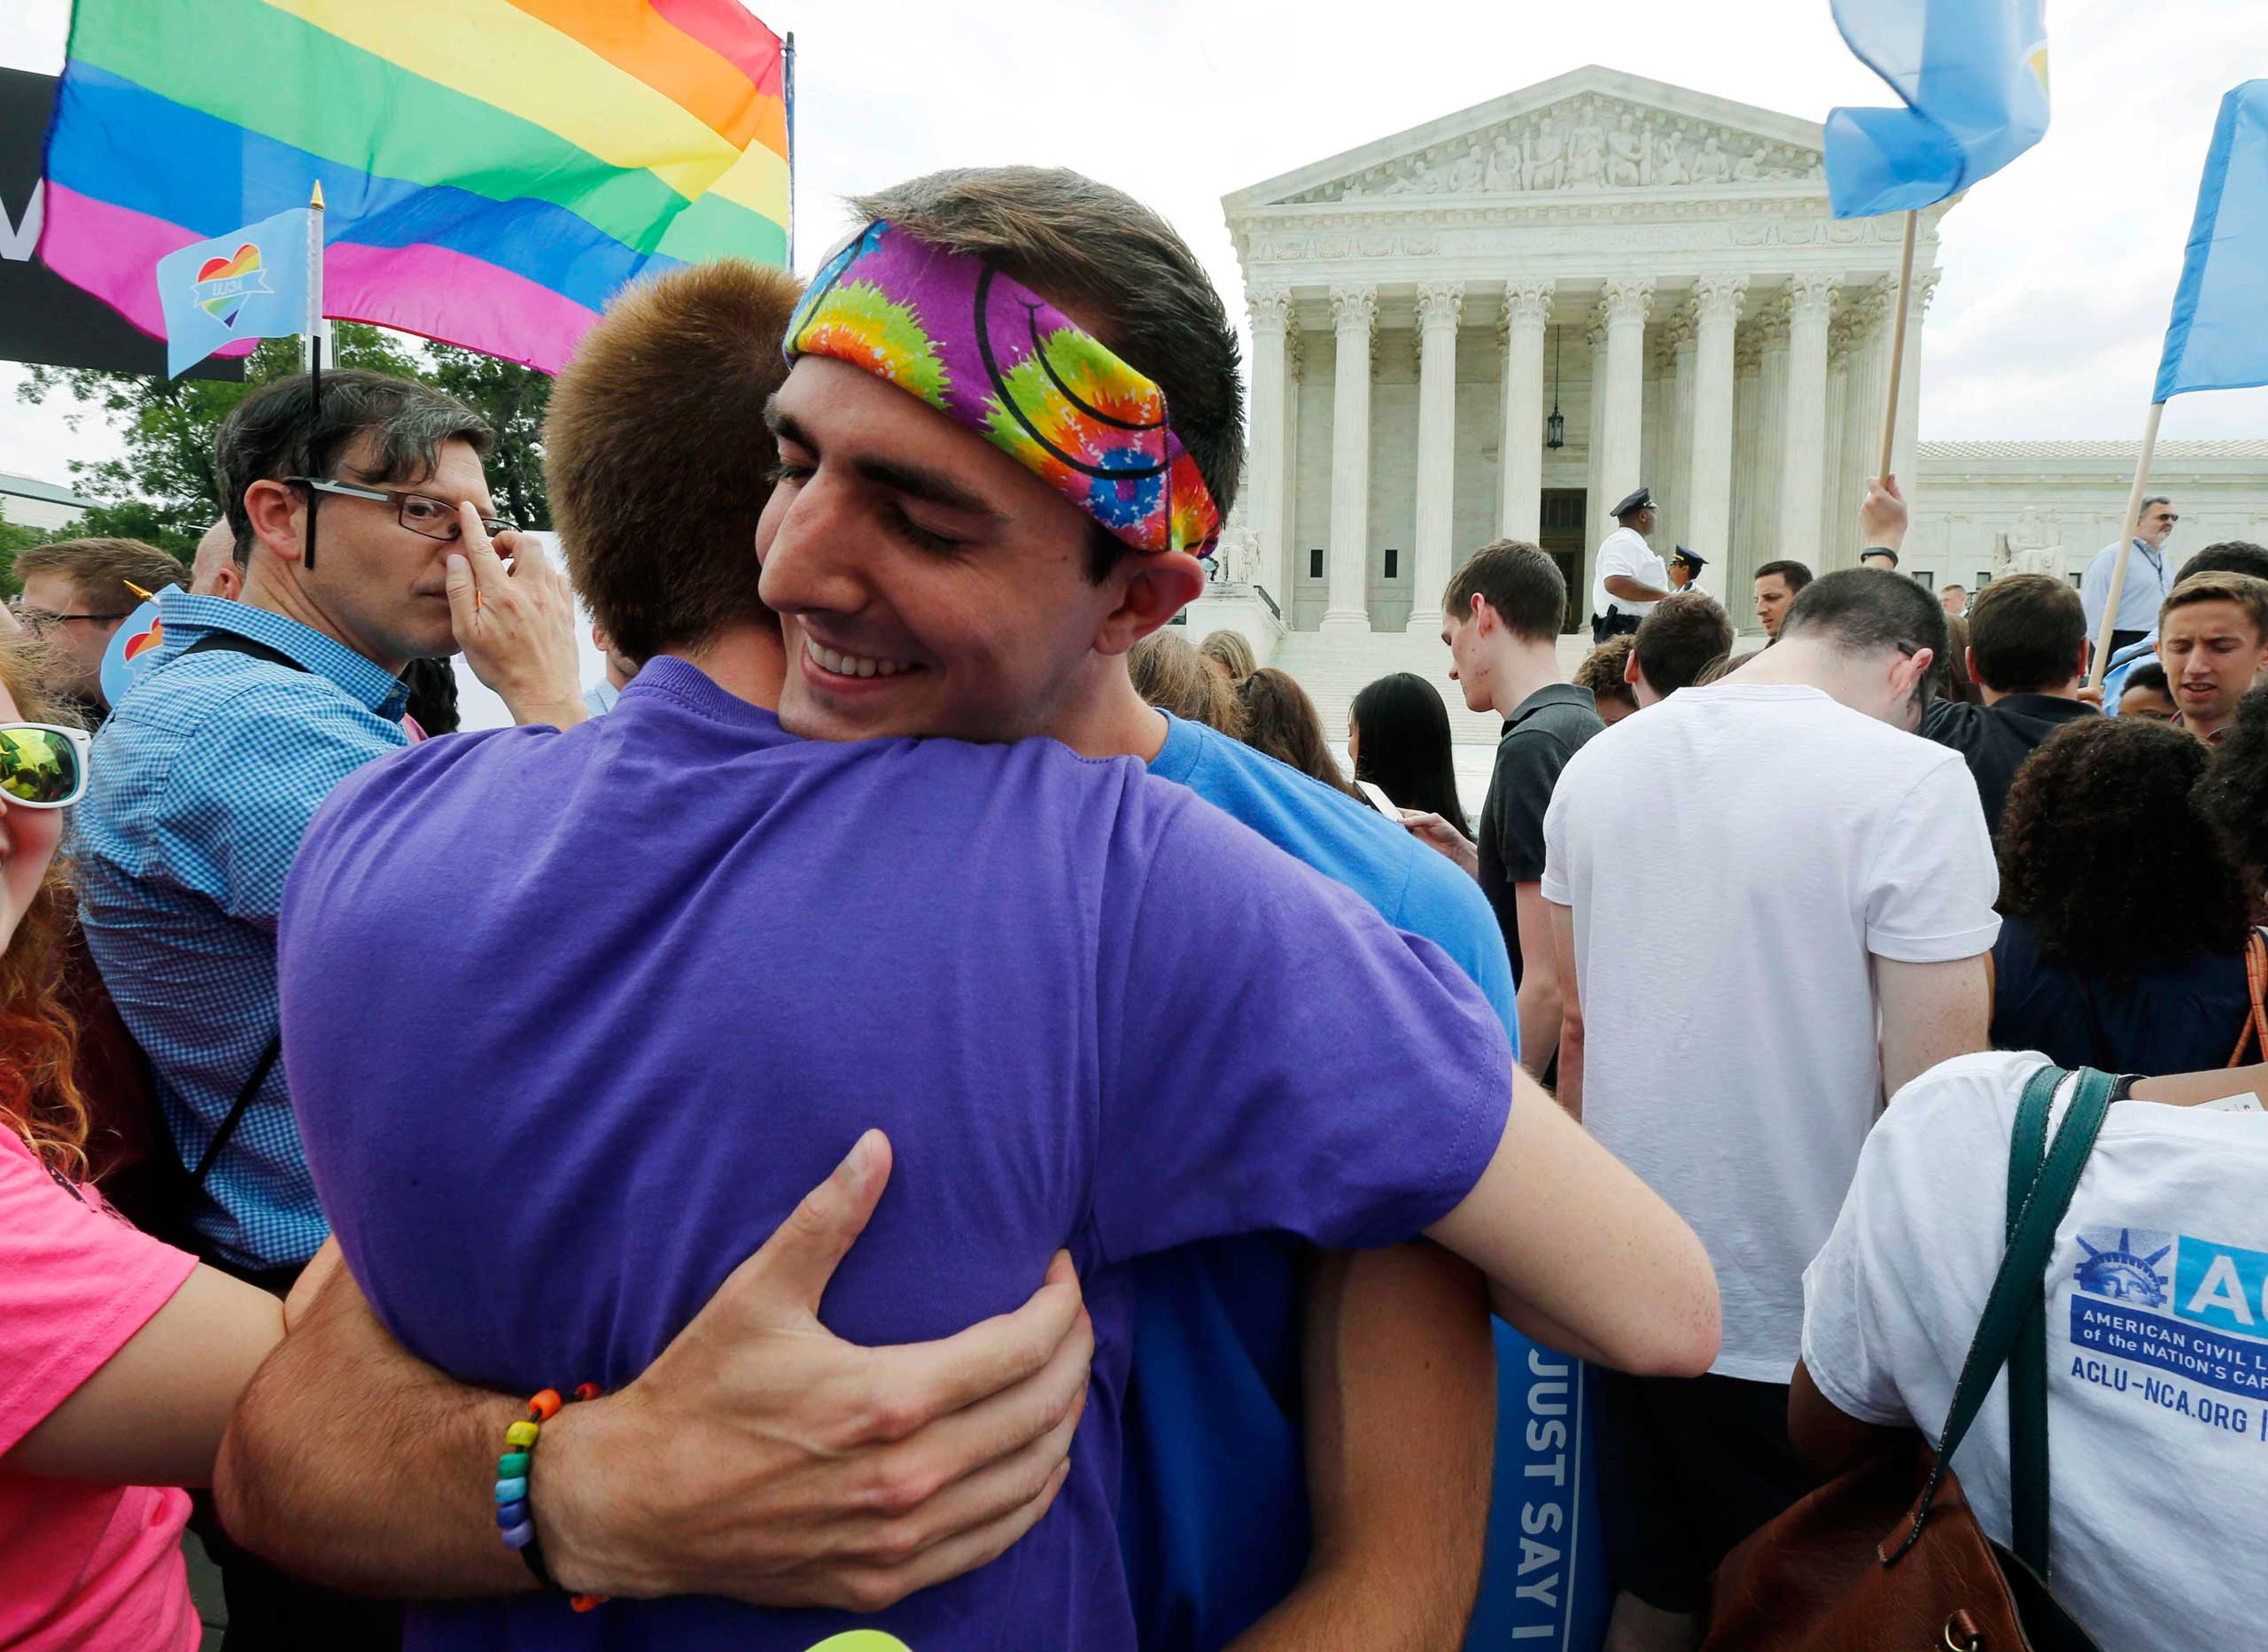 Gay rights supporters celebrate after the U.S. Supreme Court ruled that the U.S. Constitution provides same-sex couples the right to marry, outside the Supreme Court building in Washington, June 26, 2015.